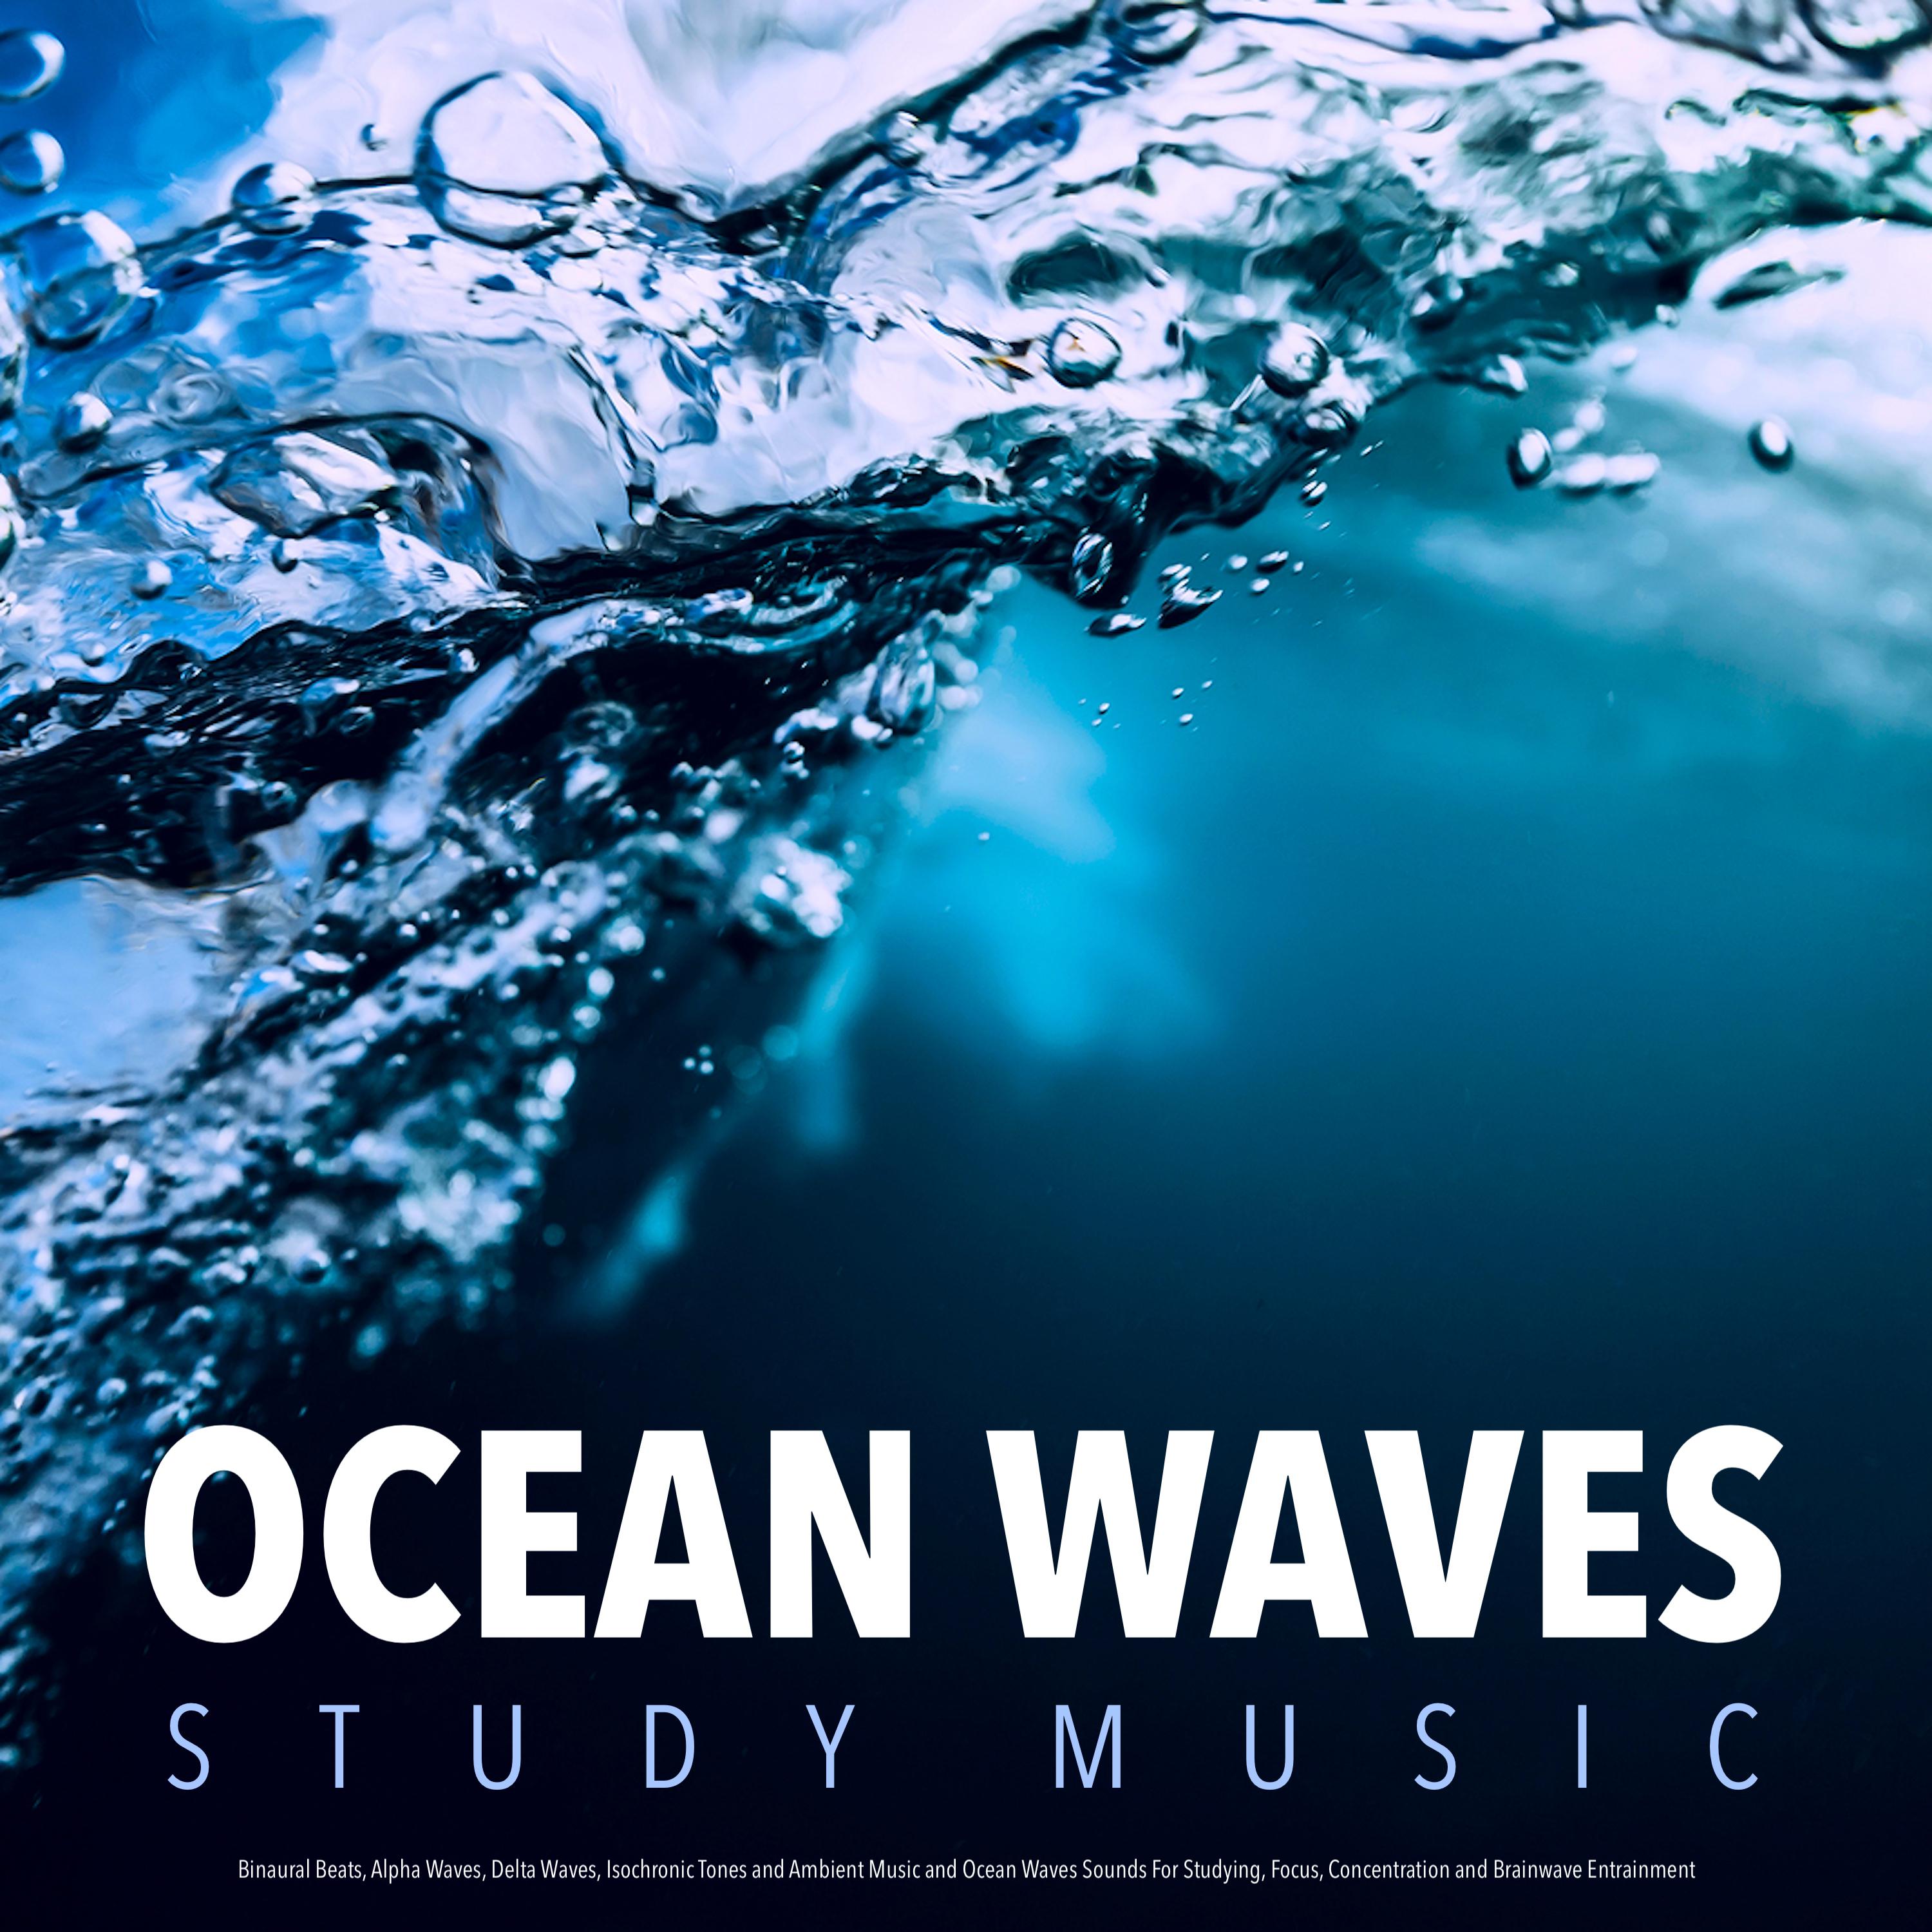 Ocean Waves Study Music: Binaural Beats, Alpha Waves, Delta Waves, Isochronic Tones and Ambient Music and Ocean Waves Sounds For Studying, Focus, Concentration and Brainwave Entrainment